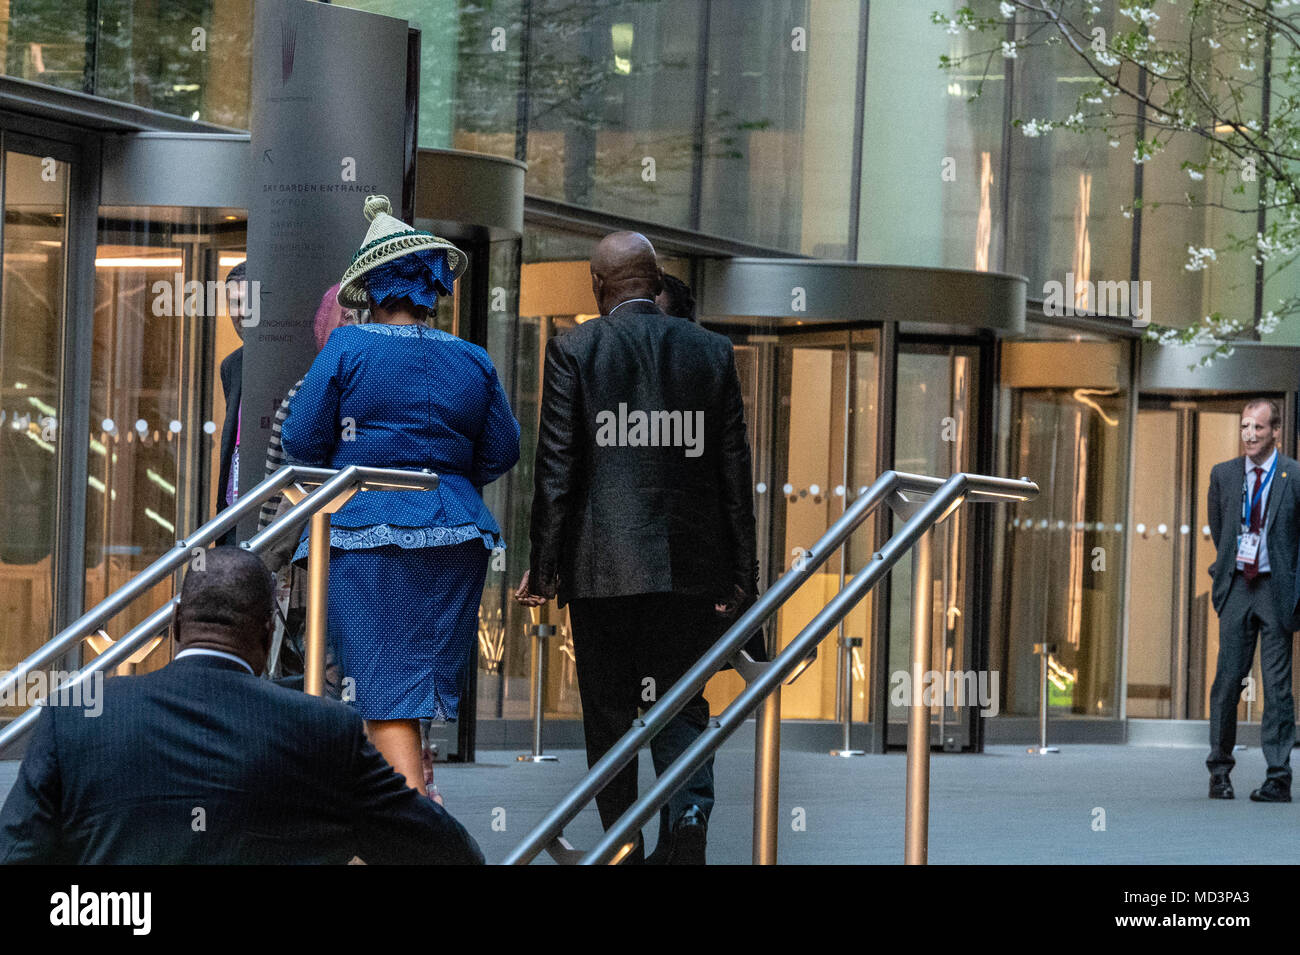 London, UK. 18th April 2018, Amid tight security Commonwealth Heads of State arrive by coach at a dinner and reception hosted by Prime Minister Theresa May, at the Walkie Talkie Building (20 Fenchurch Street) in the City of London Credit: Ian Davidson/Alamy Live News Stock Photo